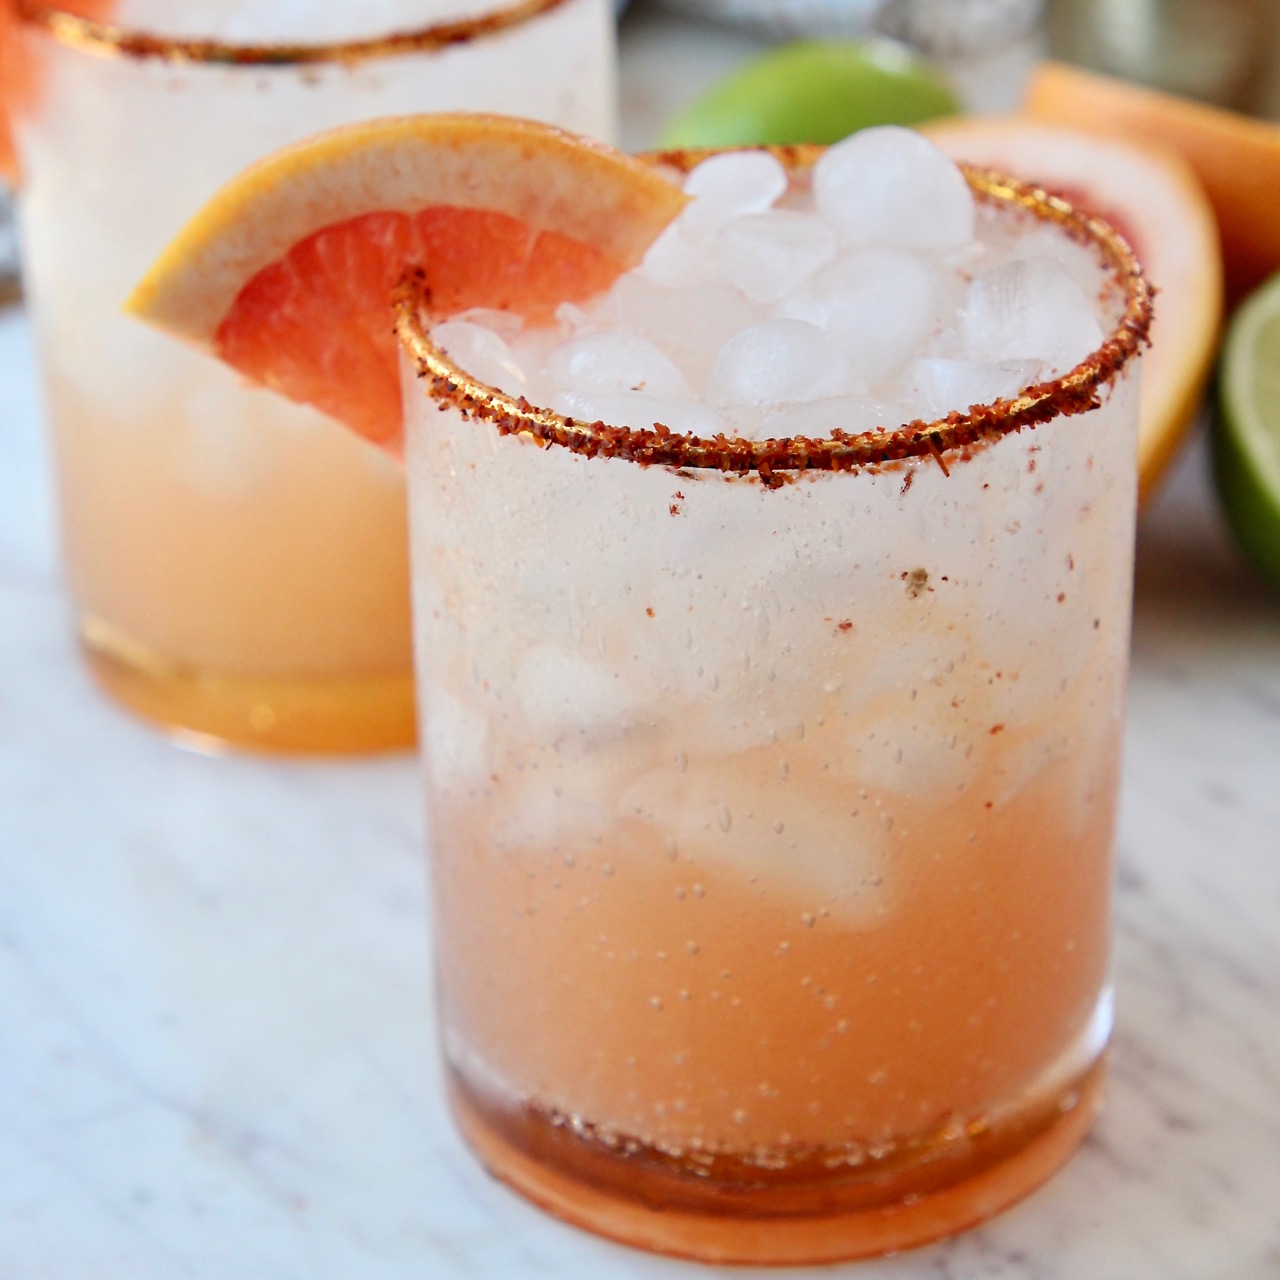 Mexican Lime Soda, Ingredients & Info